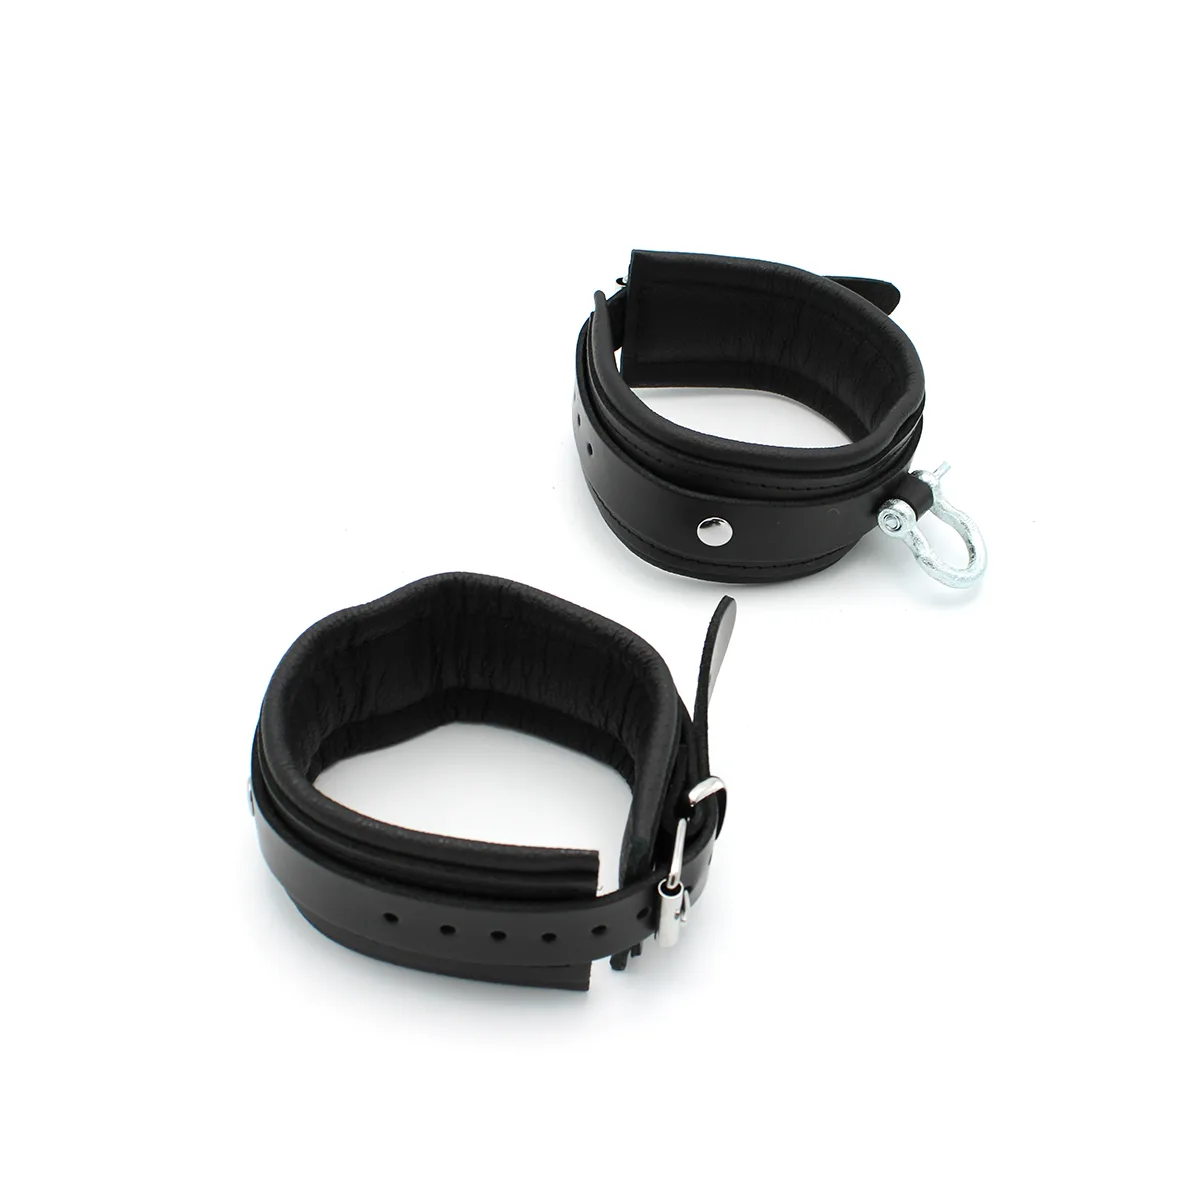 Leather-Ankle-cuffs-with-Metal-Shackle-134-KIO-0372-3